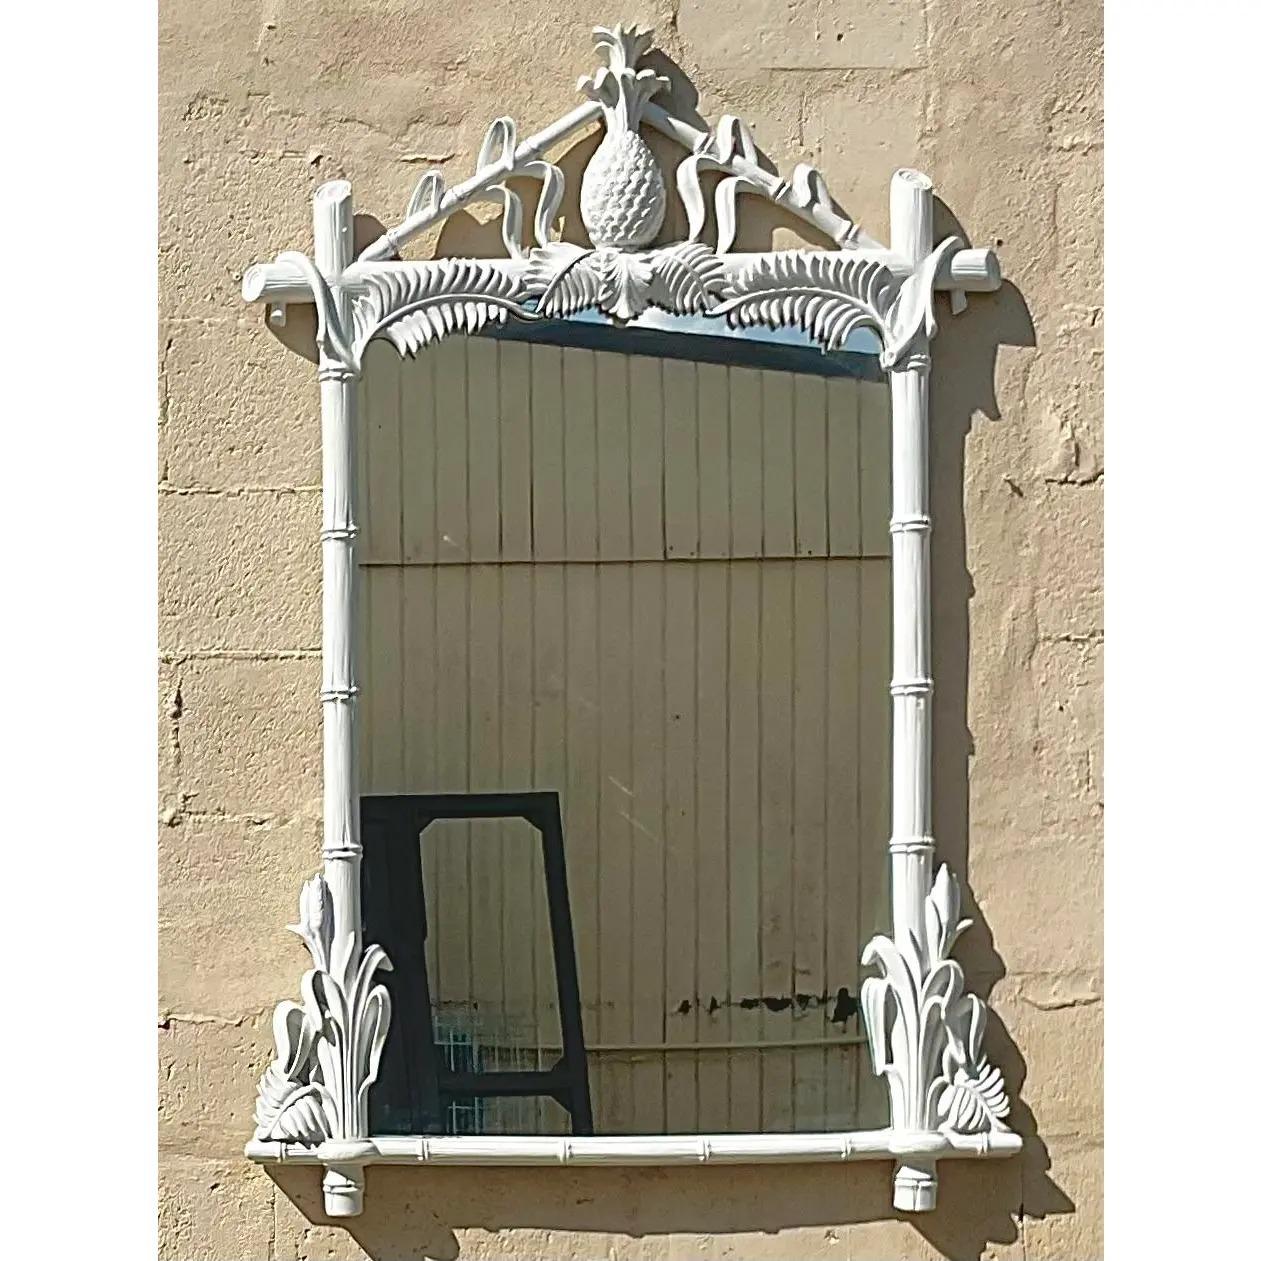 A fabulous vintage Coastal Gampel Stoll mirror. The coveted Pineapple style in a bright white finish. Two mirrors available if a pair is needed. Acquired from a Palm Beach estate.